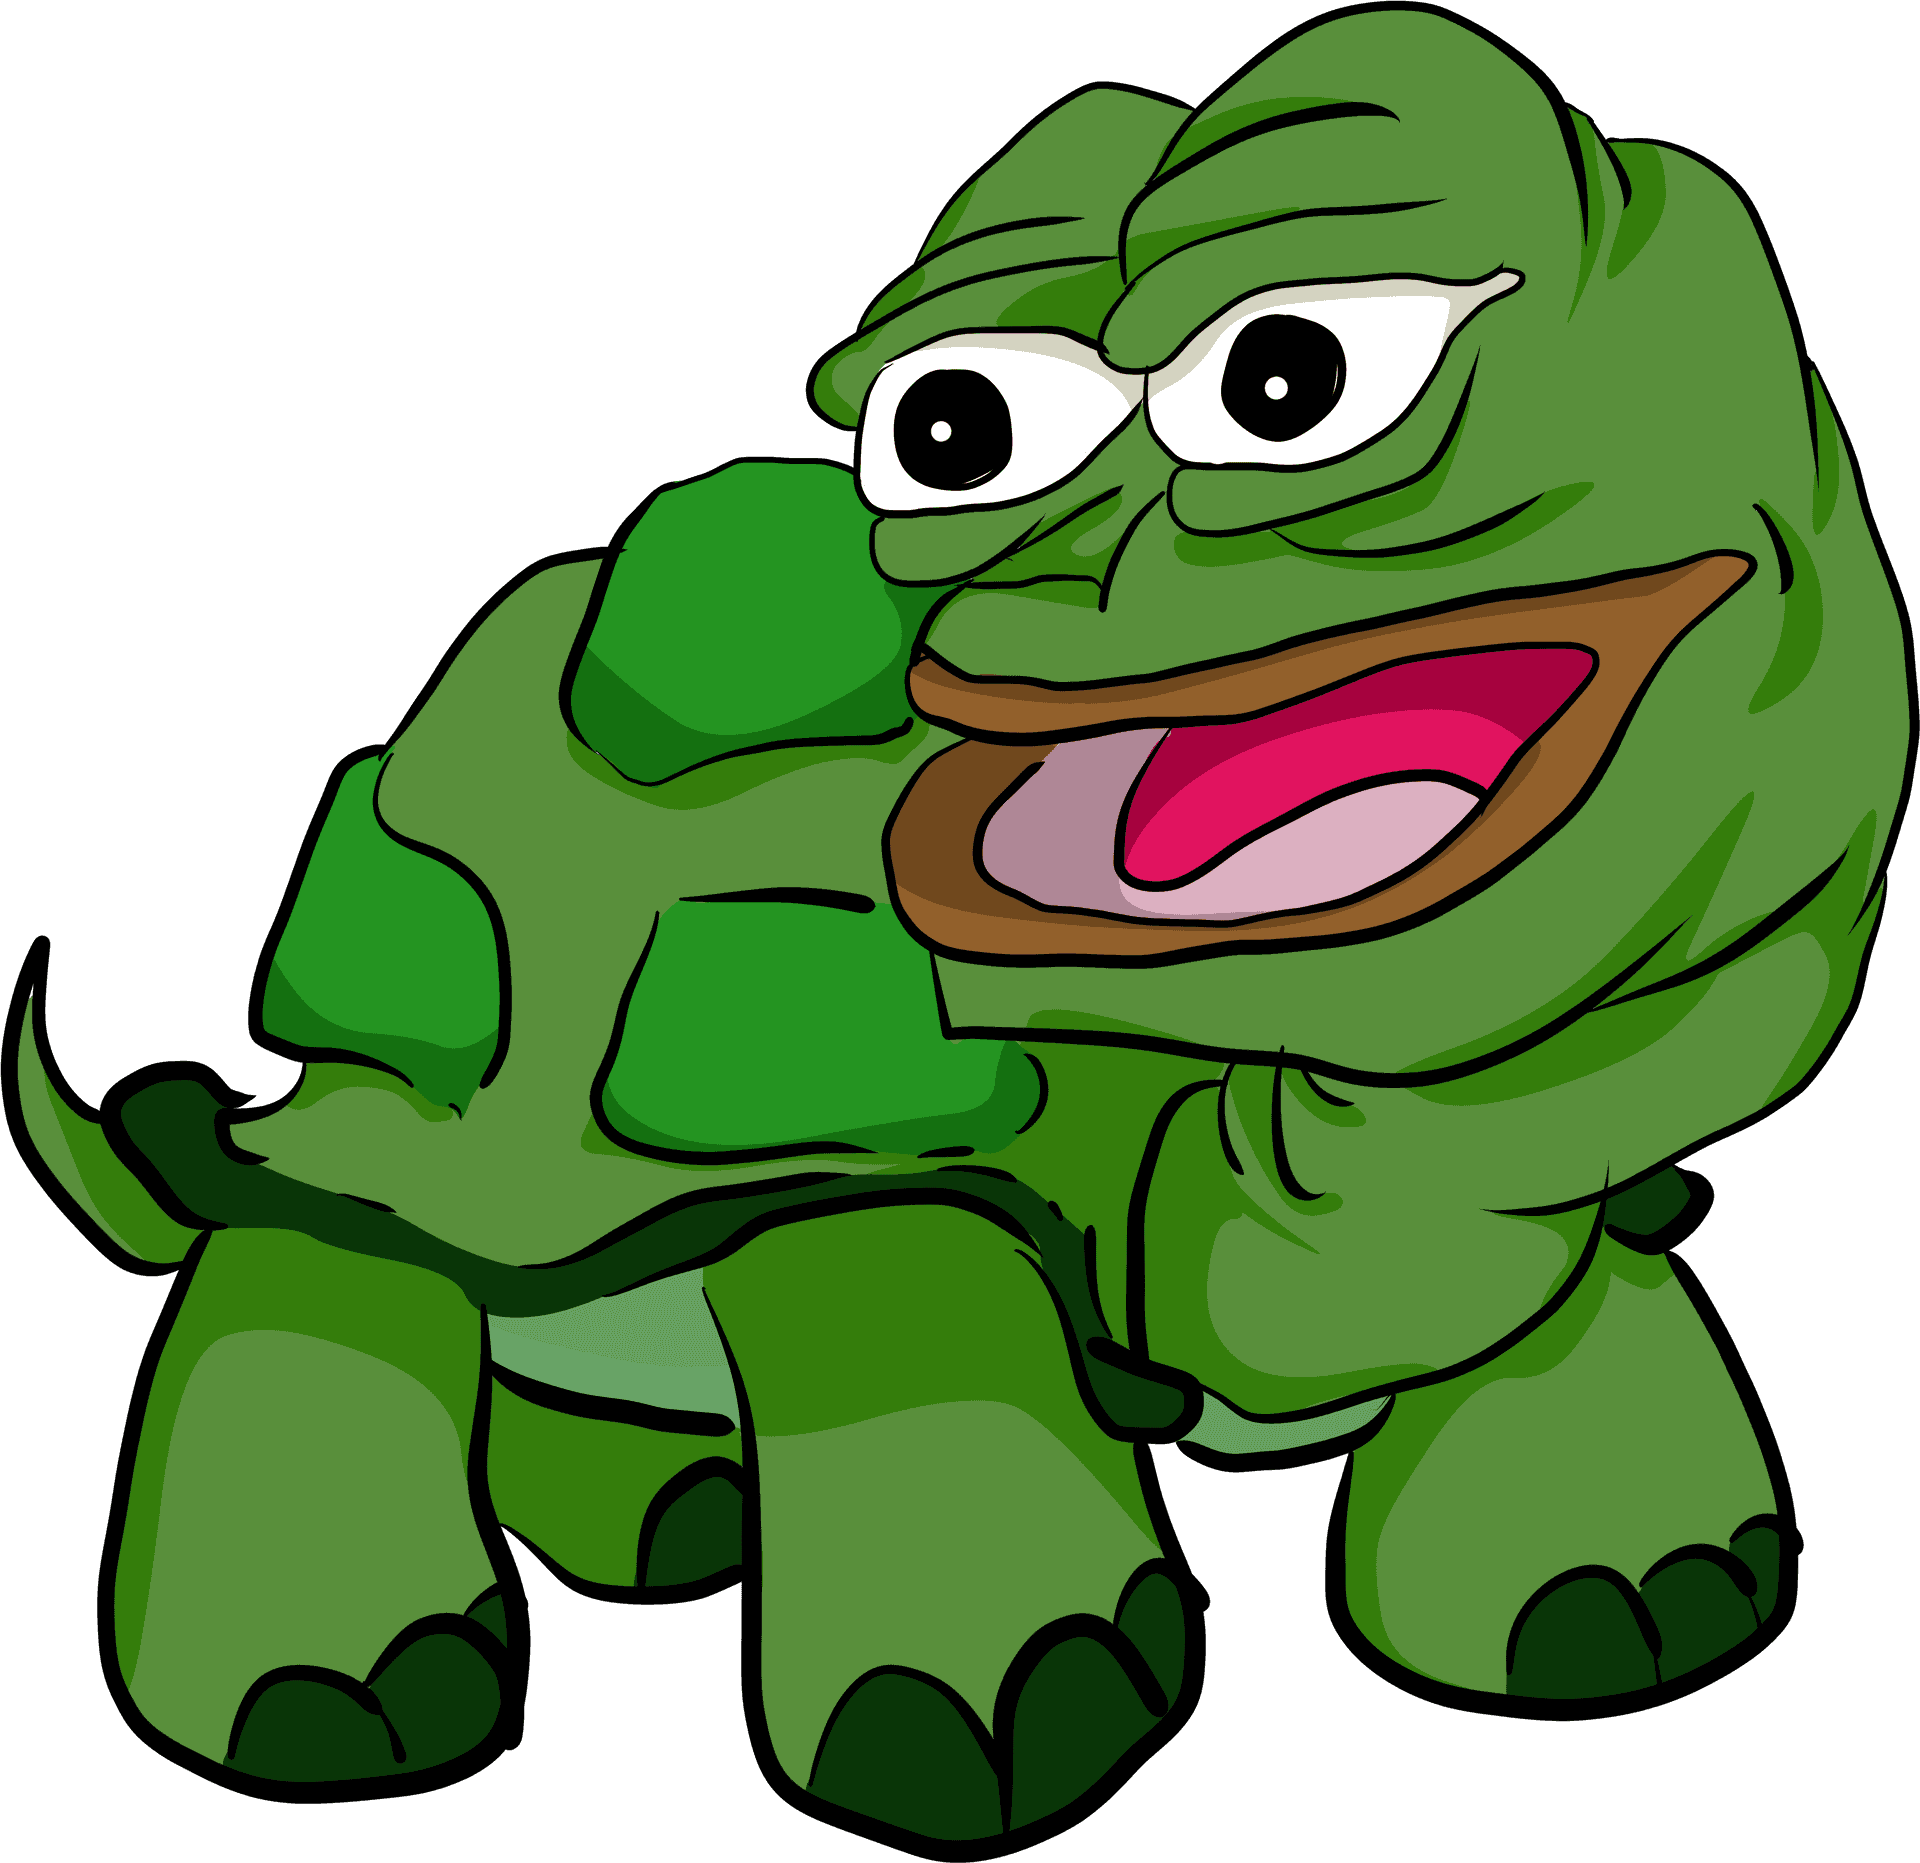 Download Pepe The Frog Cartoon